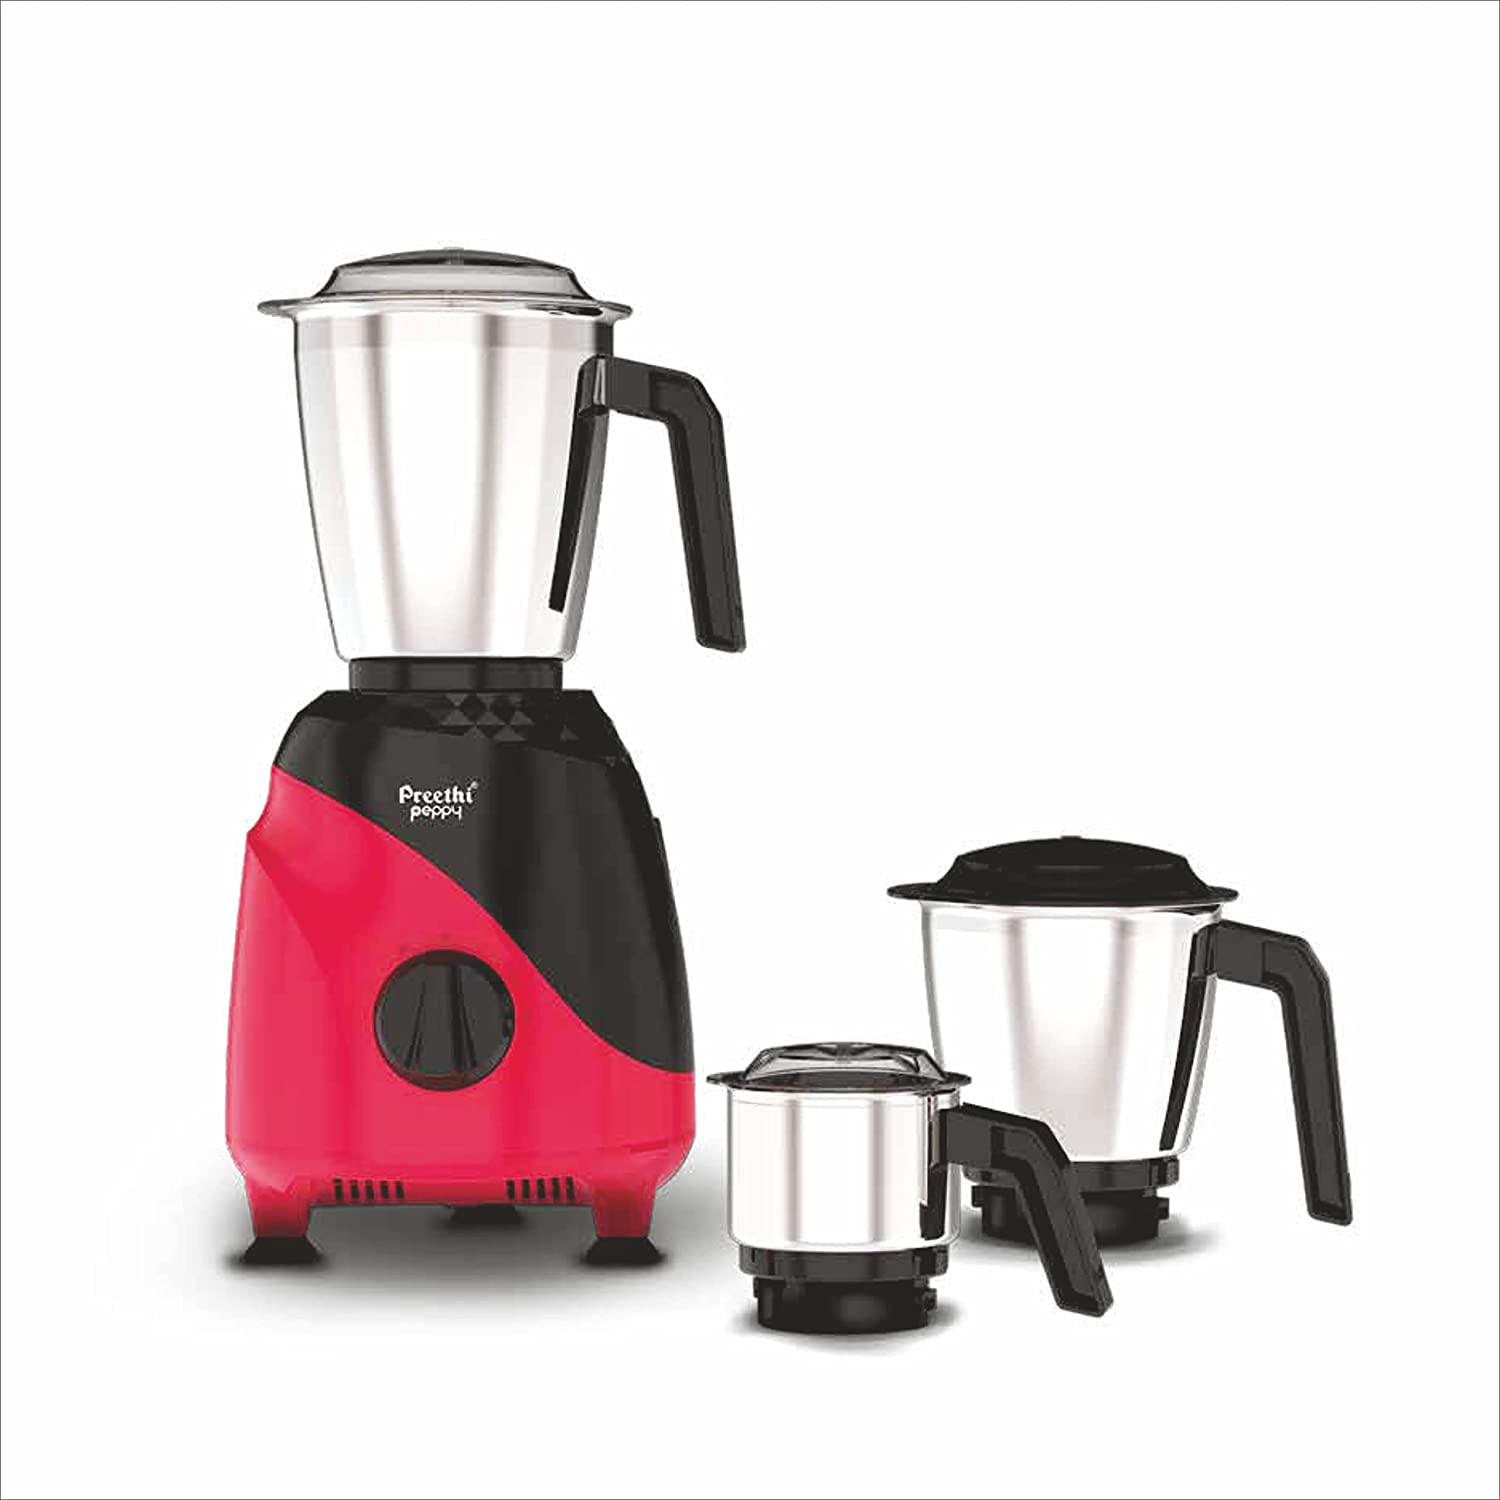 Click to open expanded view   VIDEO      Preethi Peppy MG-245 mixer grinder, 750 watt, Black & Red, 3 jars, Vega W5 Motor with 5yr Warranty & Lifelong Free Service